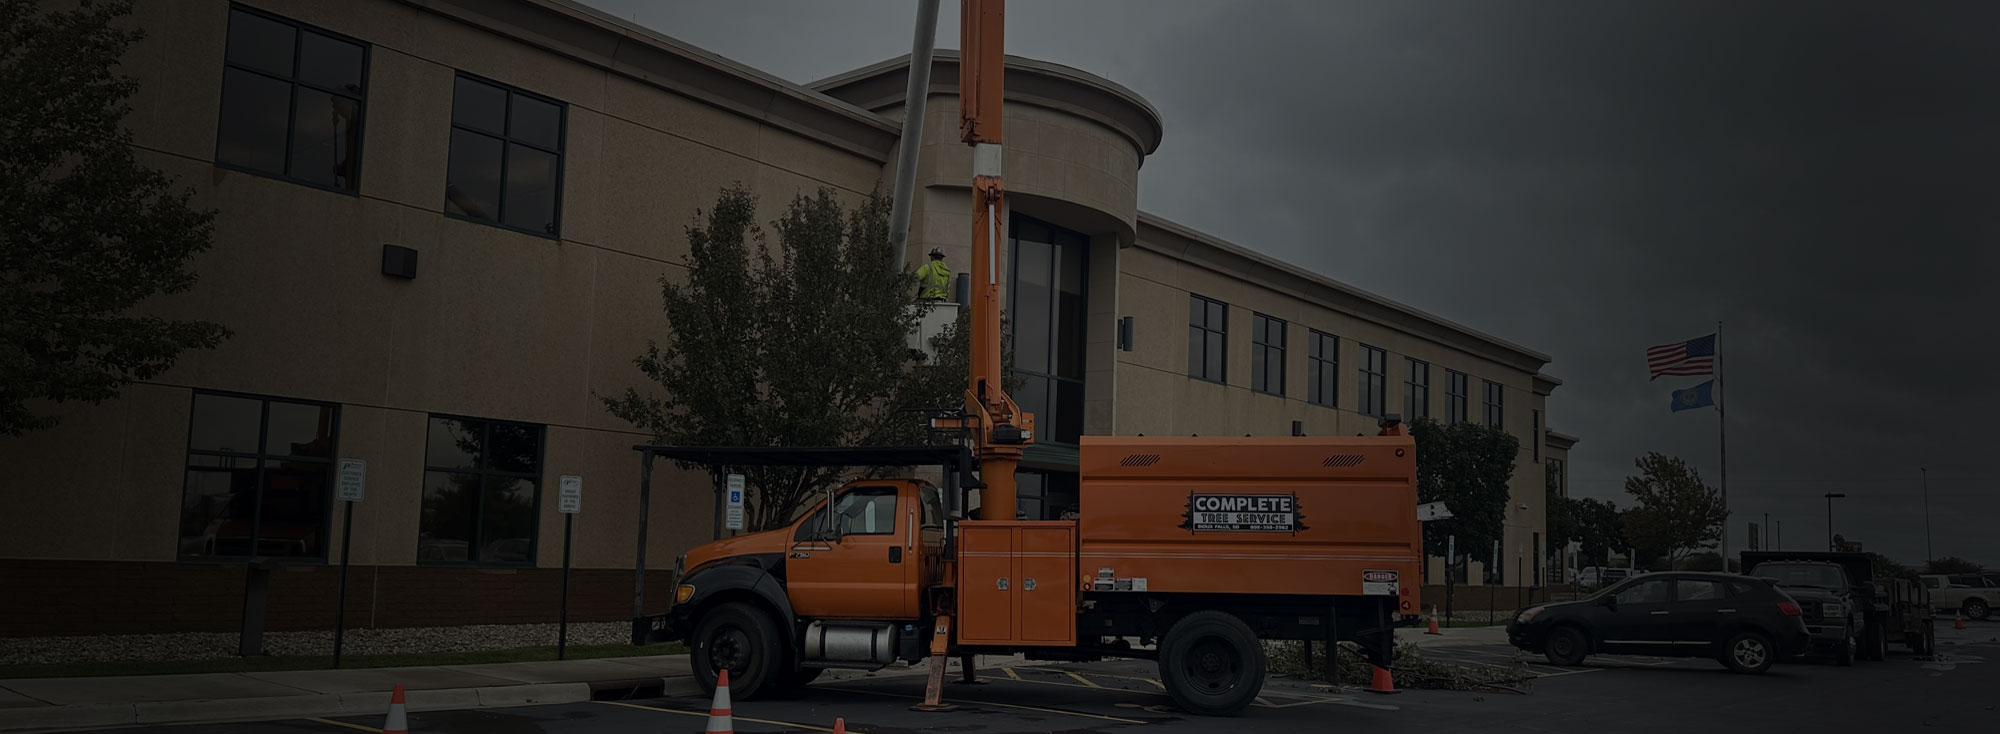 Commercial Tree Services In Sioux Falls, SD